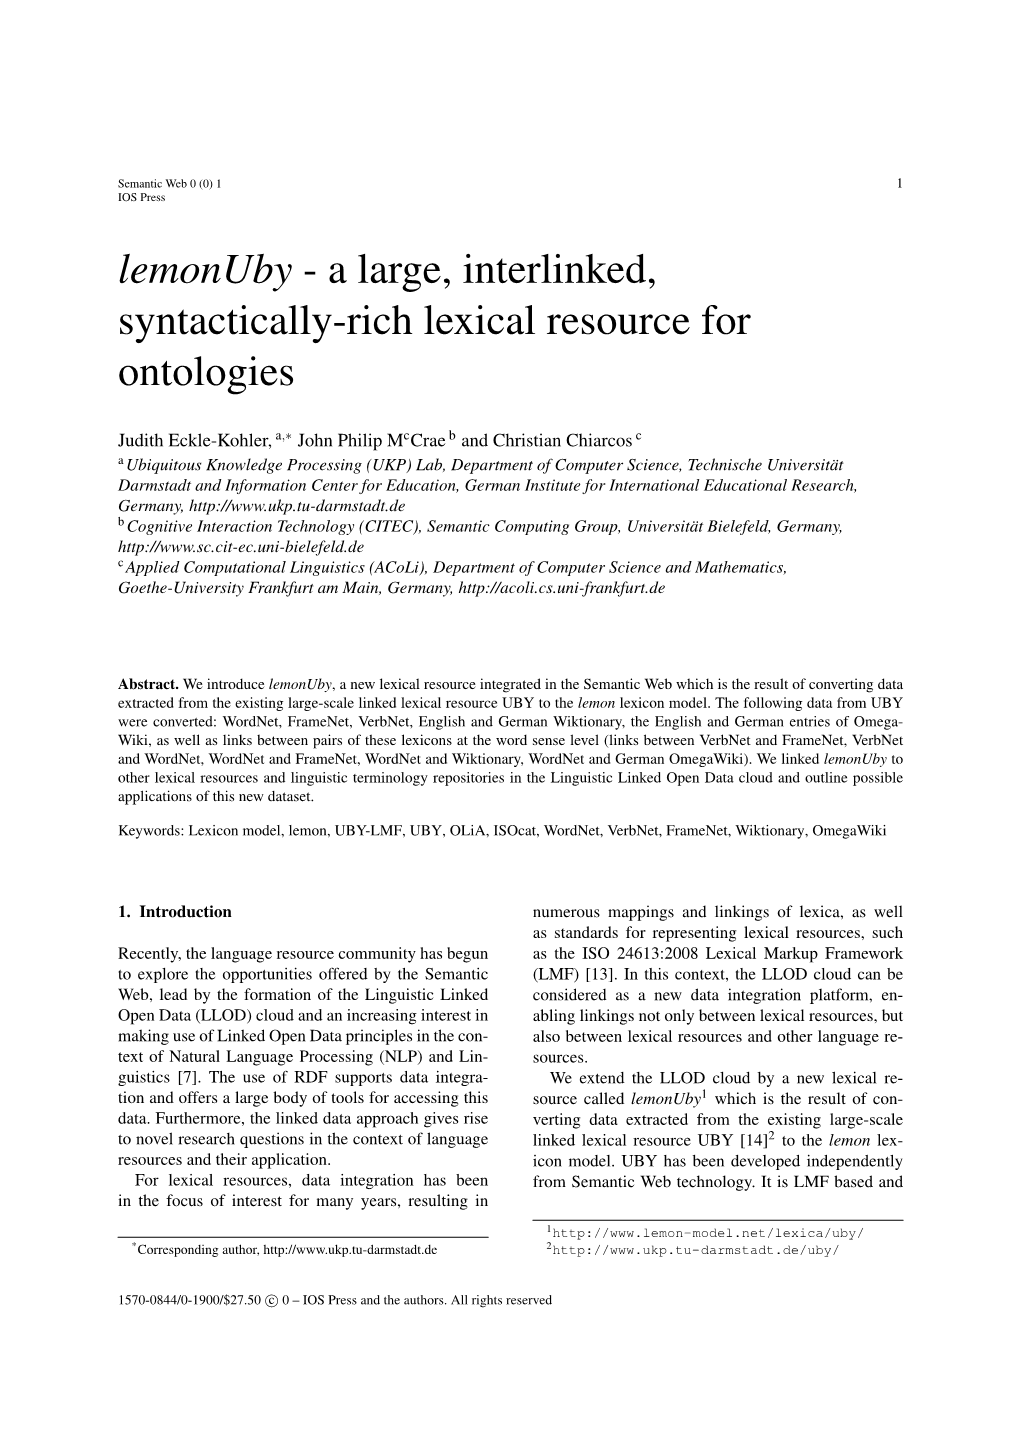 A Large, Interlinked, Syntactically-Rich Lexical Resource for Ontologies